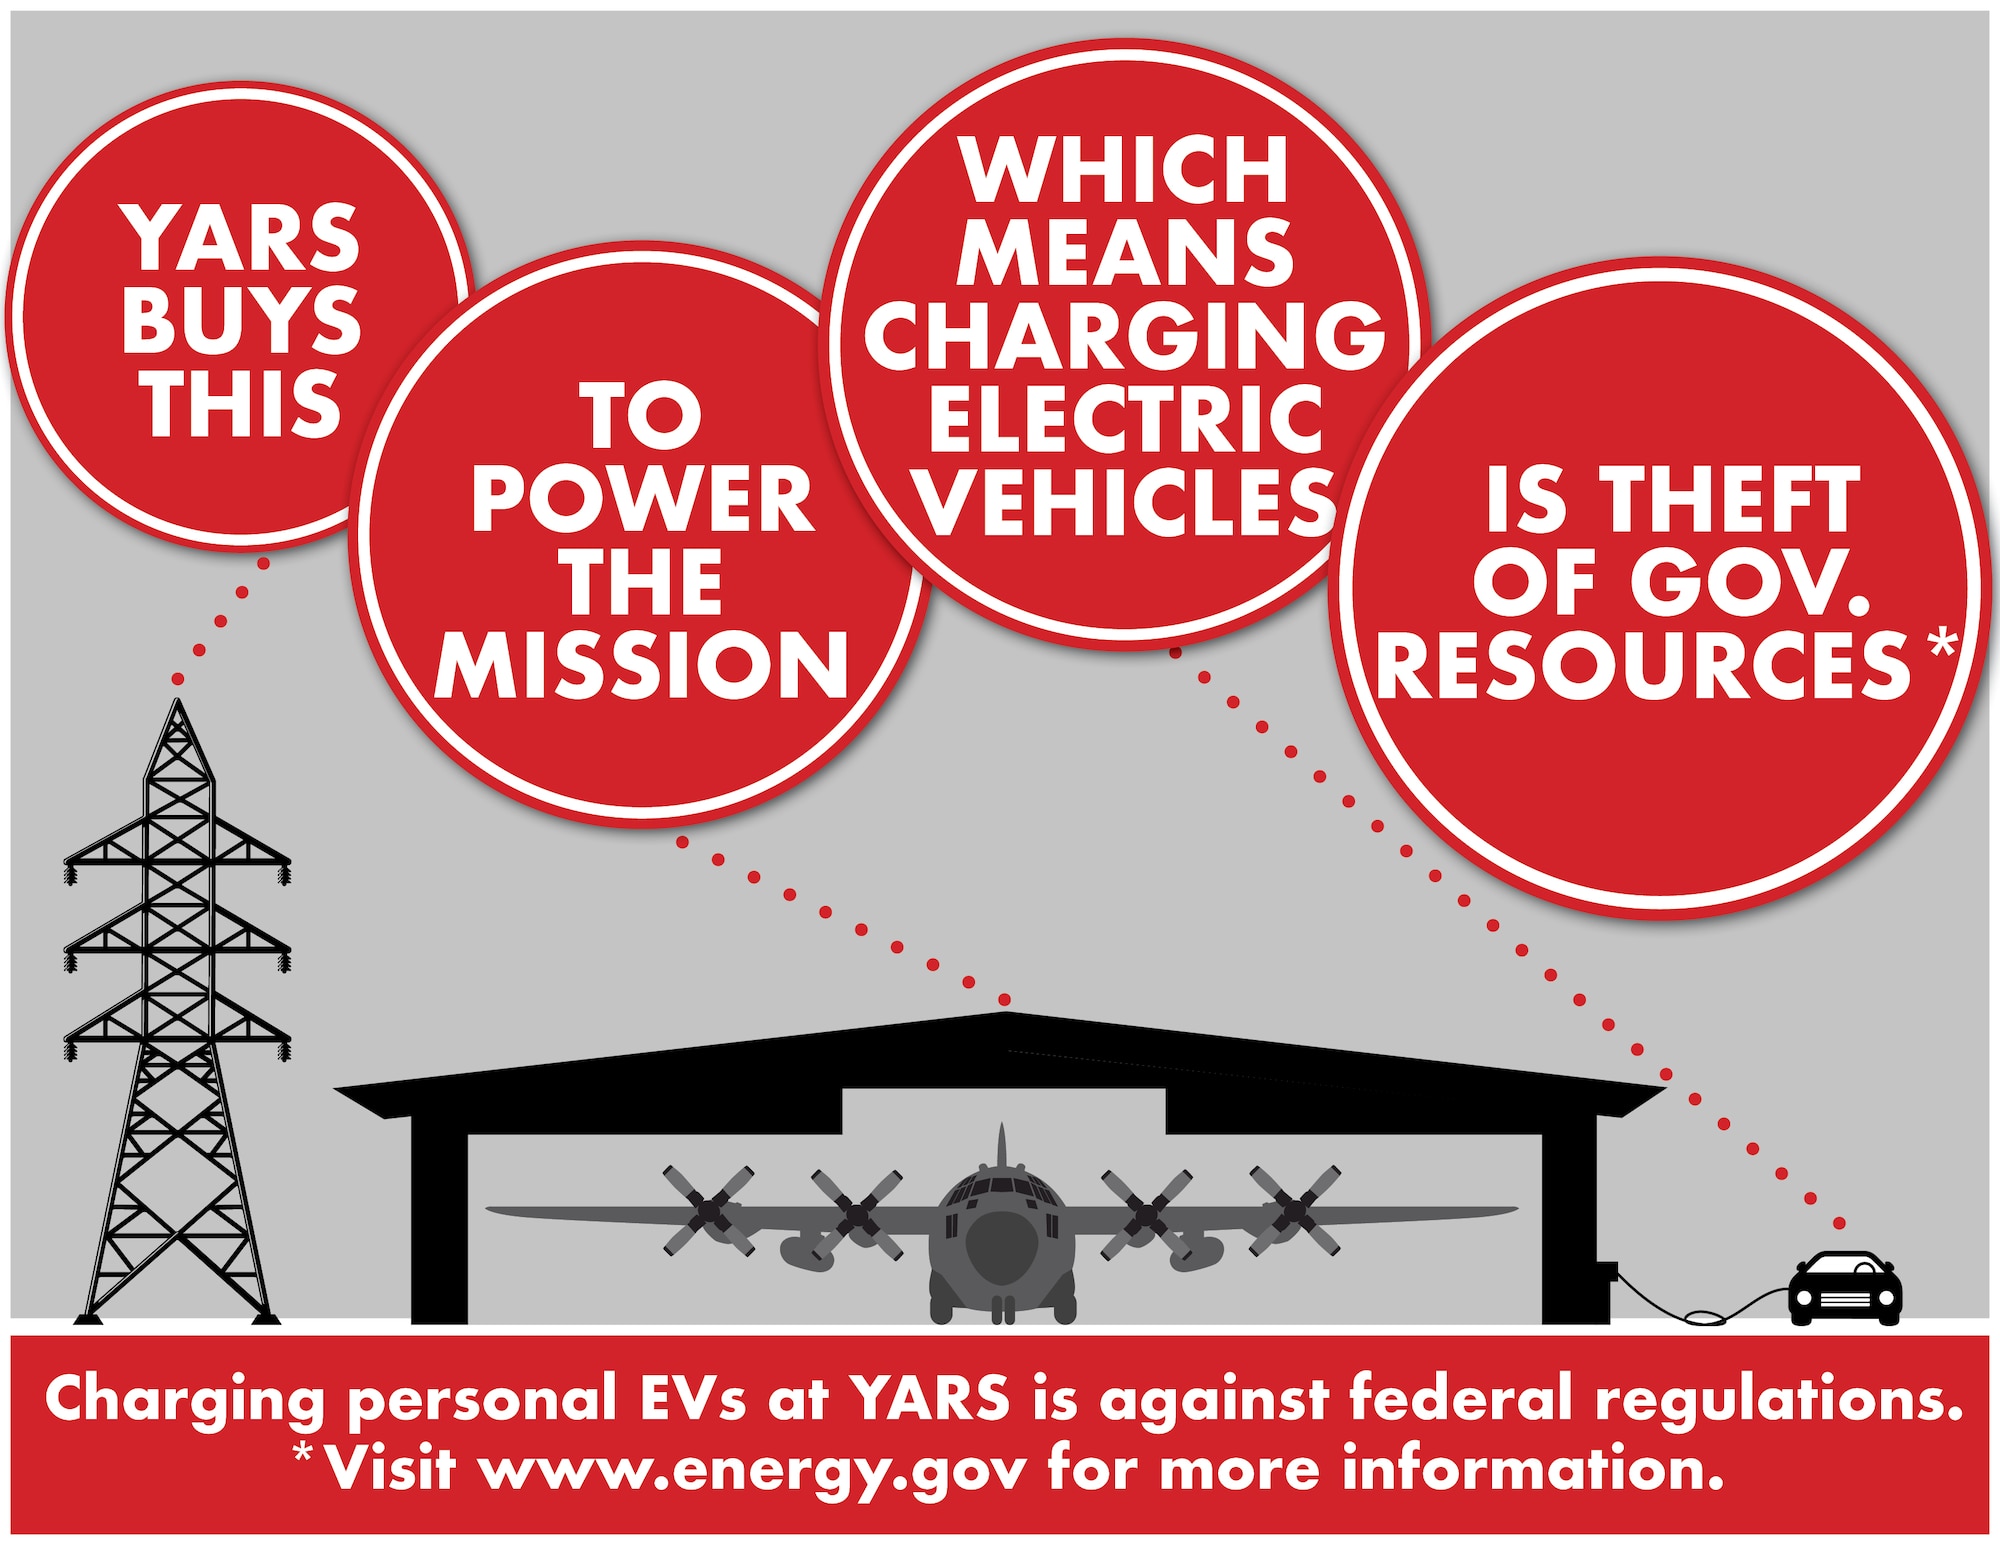 Youngstown Air Reserve Station does not offer electric vehicle charging stations on-base. Charging personal EVs is misuse of government resources.